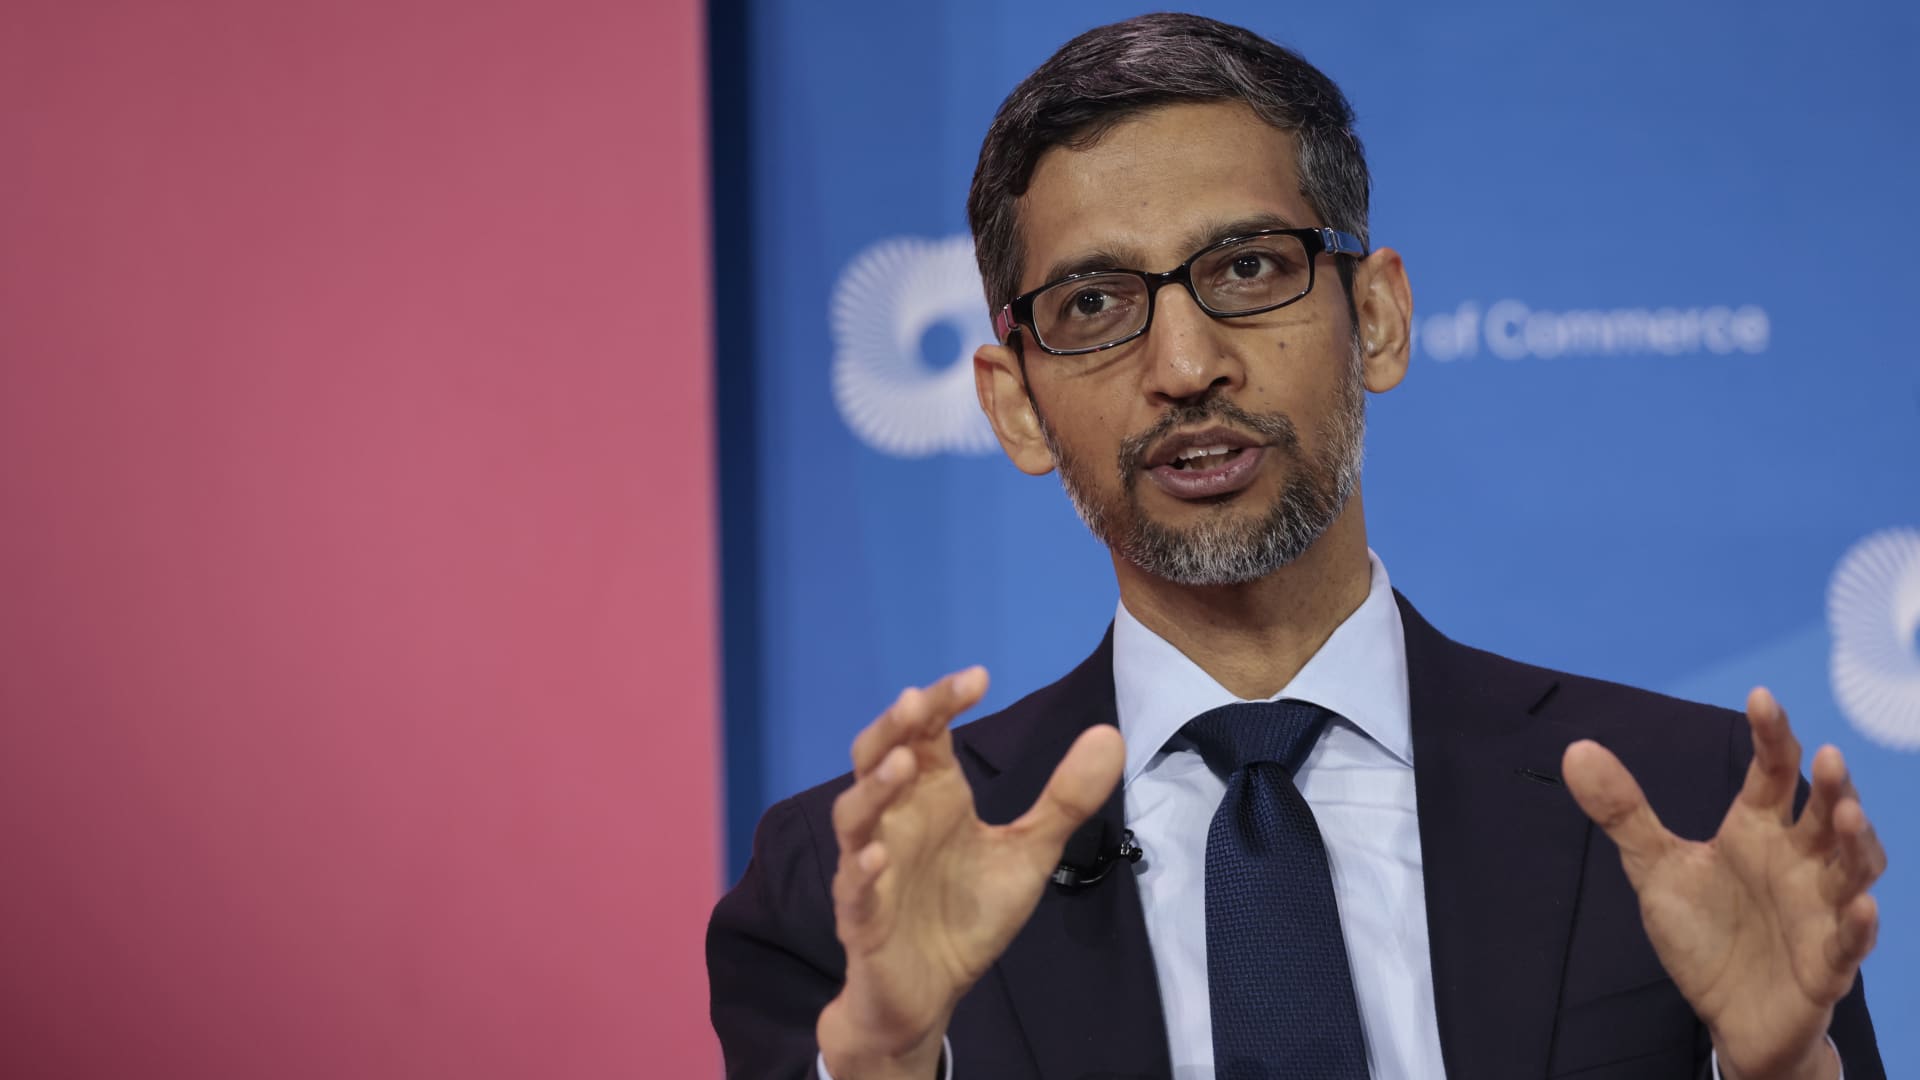 Google CEO Pichai says company will slow hiring through 2023 in memo to employees